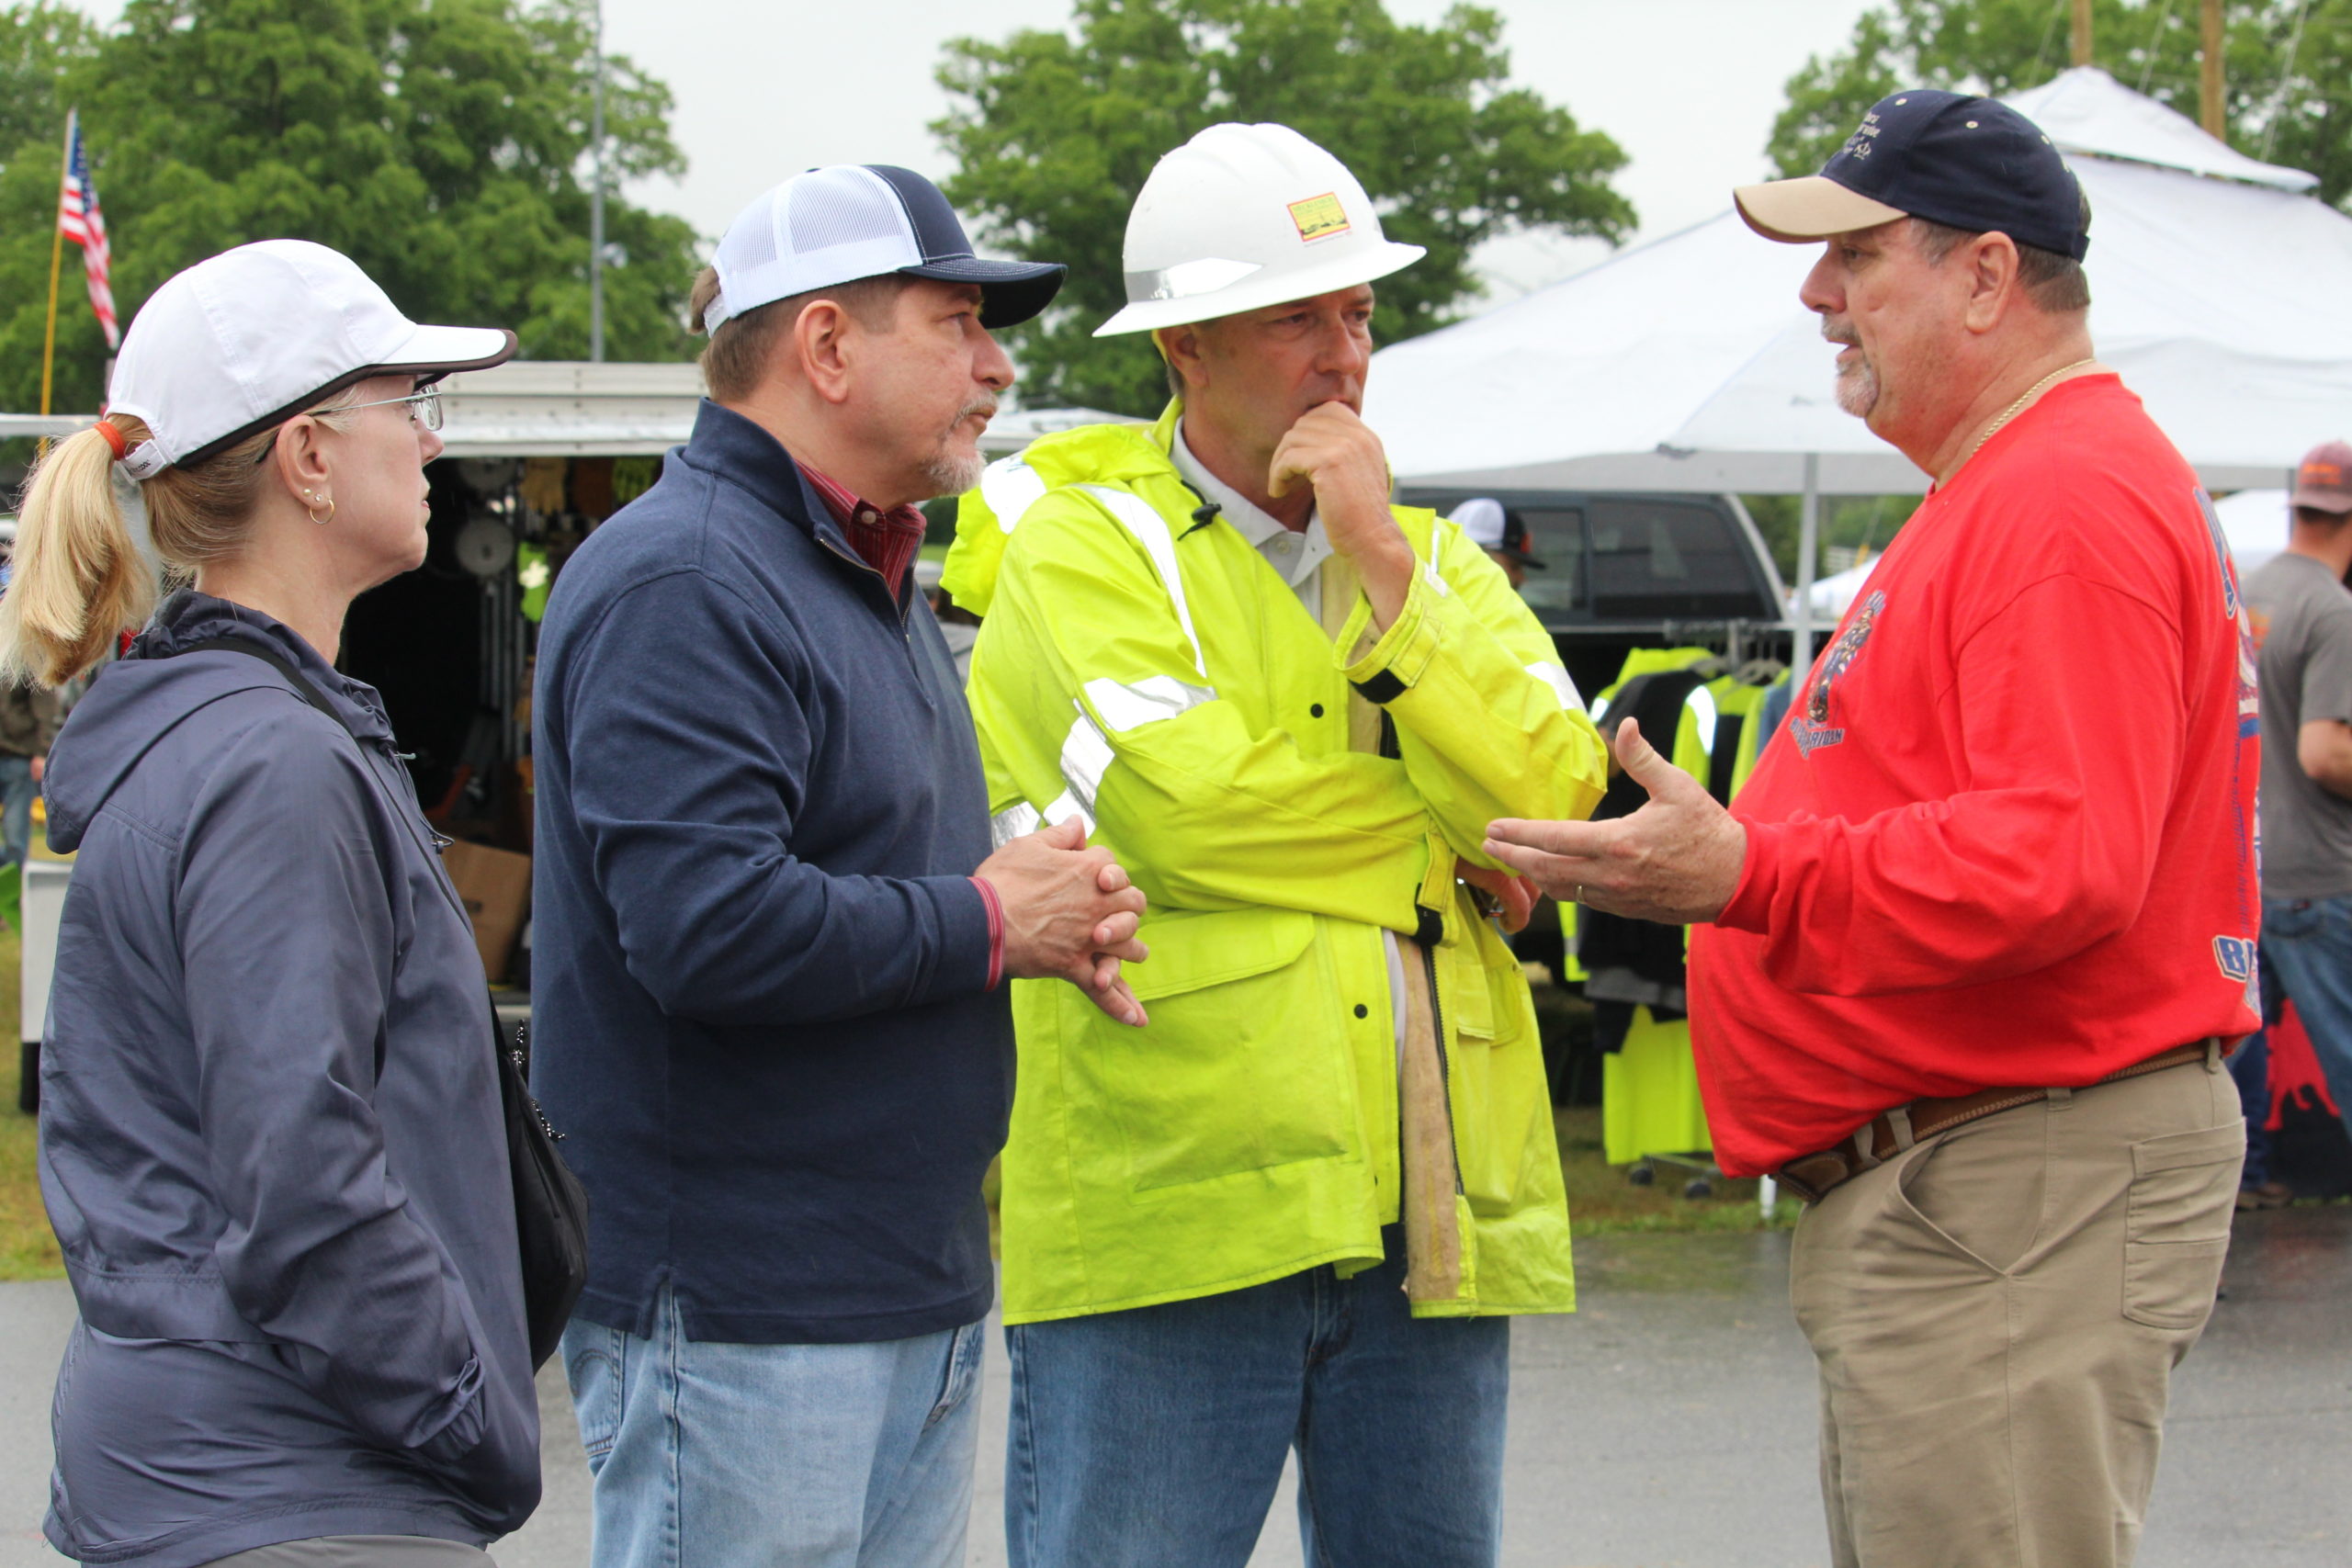 Delegate Reid of Loudoun County visits with John Lee, President & CEO of Mecklenburg Electric Cooperative, at the Gaff-n-Go Lineworker’s Rodeo.